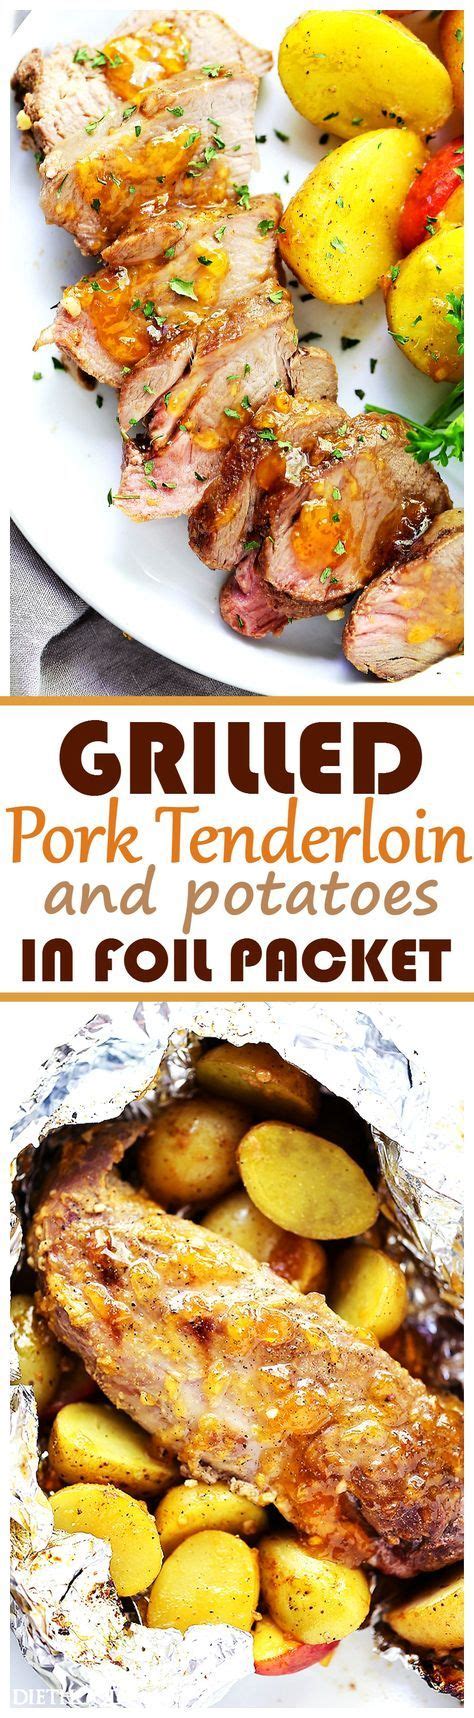 Tender pork loin is easy to prepare and absolutely delicious. Grilled Peach-Glazed Pork Tenderloin Foil Packet with Potatoes - Glazed with peach preserves and ...